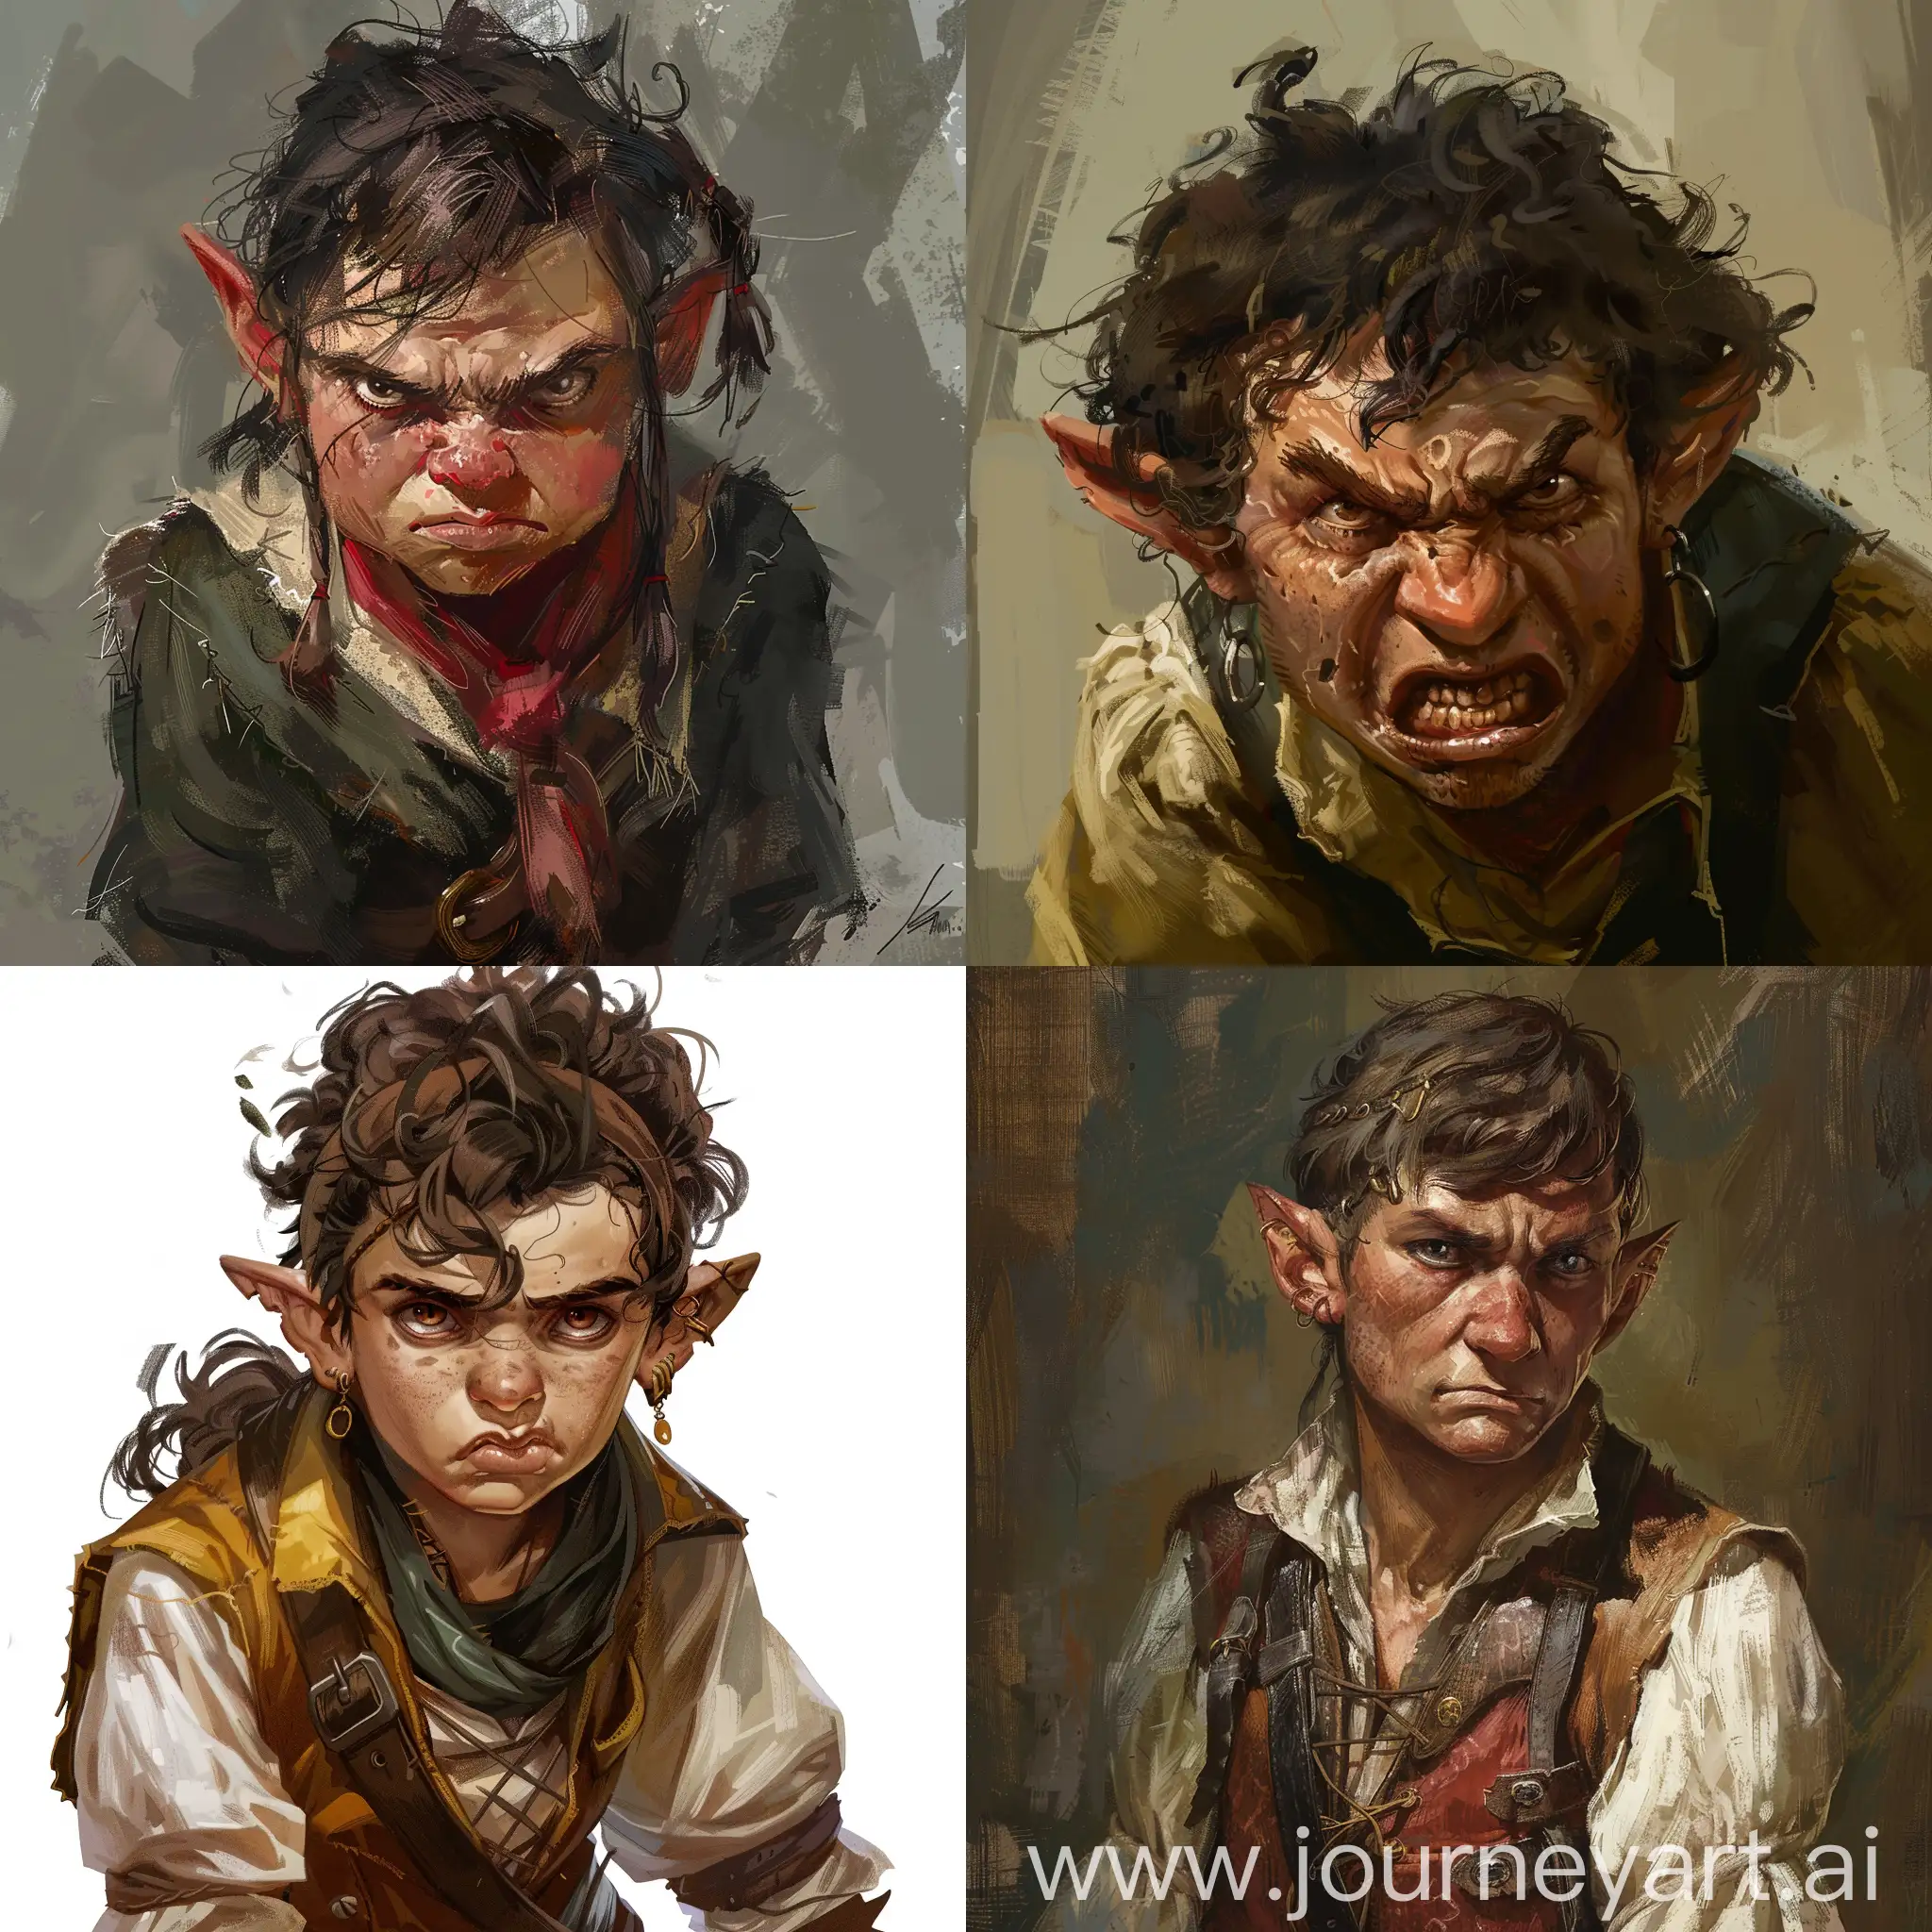 Young-Halfling-Bard-Expressing-Anger-in-Dungeons-Dragons-Style